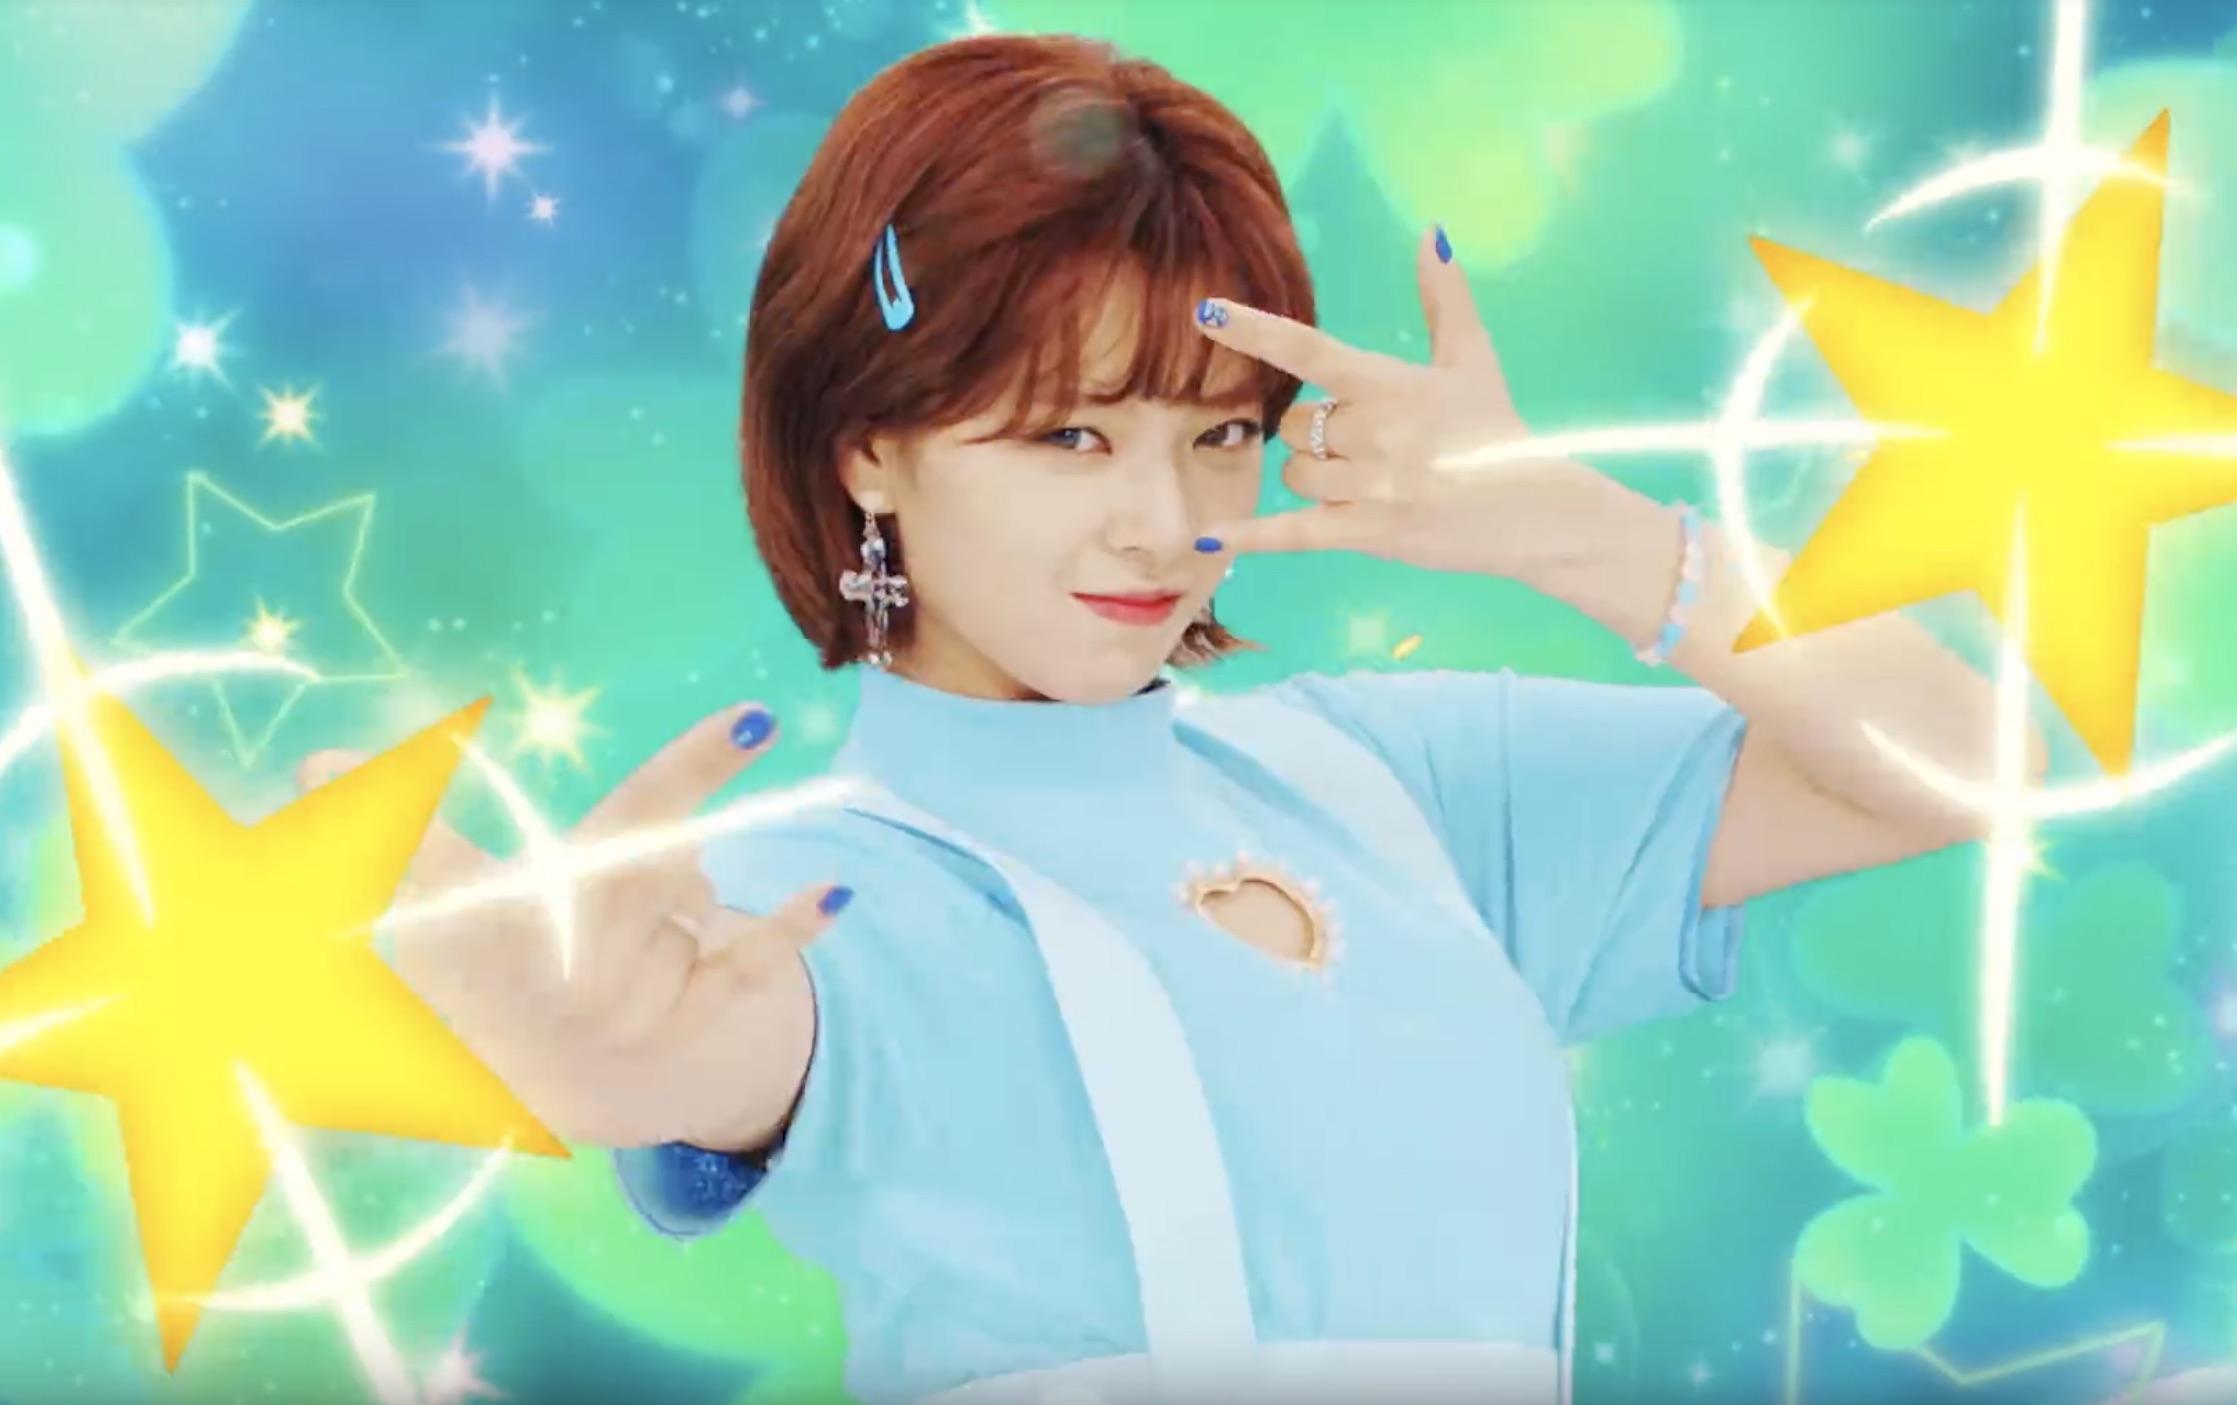 TWICE Transform into Anime Characters in Cute “Candy Pop